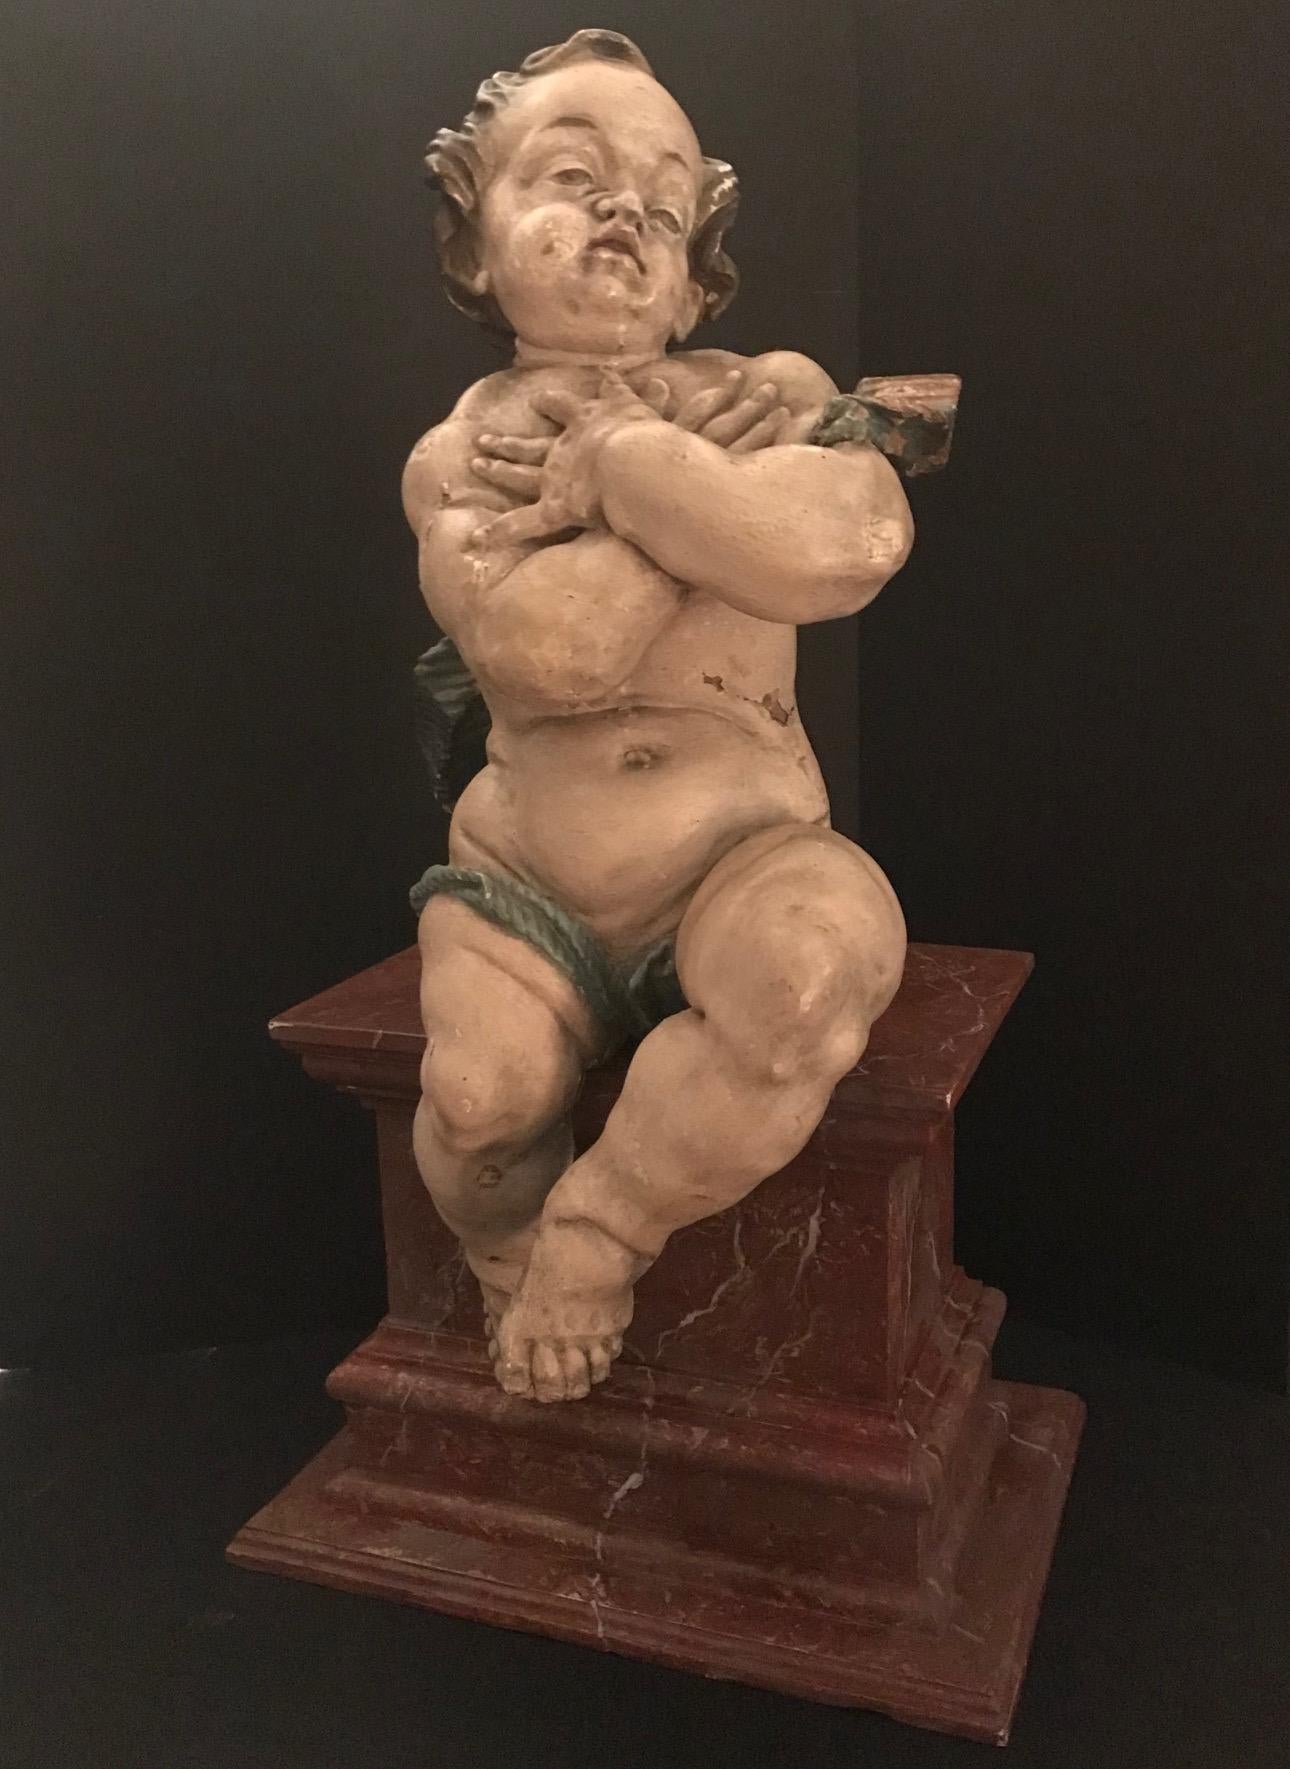 Hand-Carved German Baroque Wood Carved Life Sized Putto, Original Polychrome #1 of 2